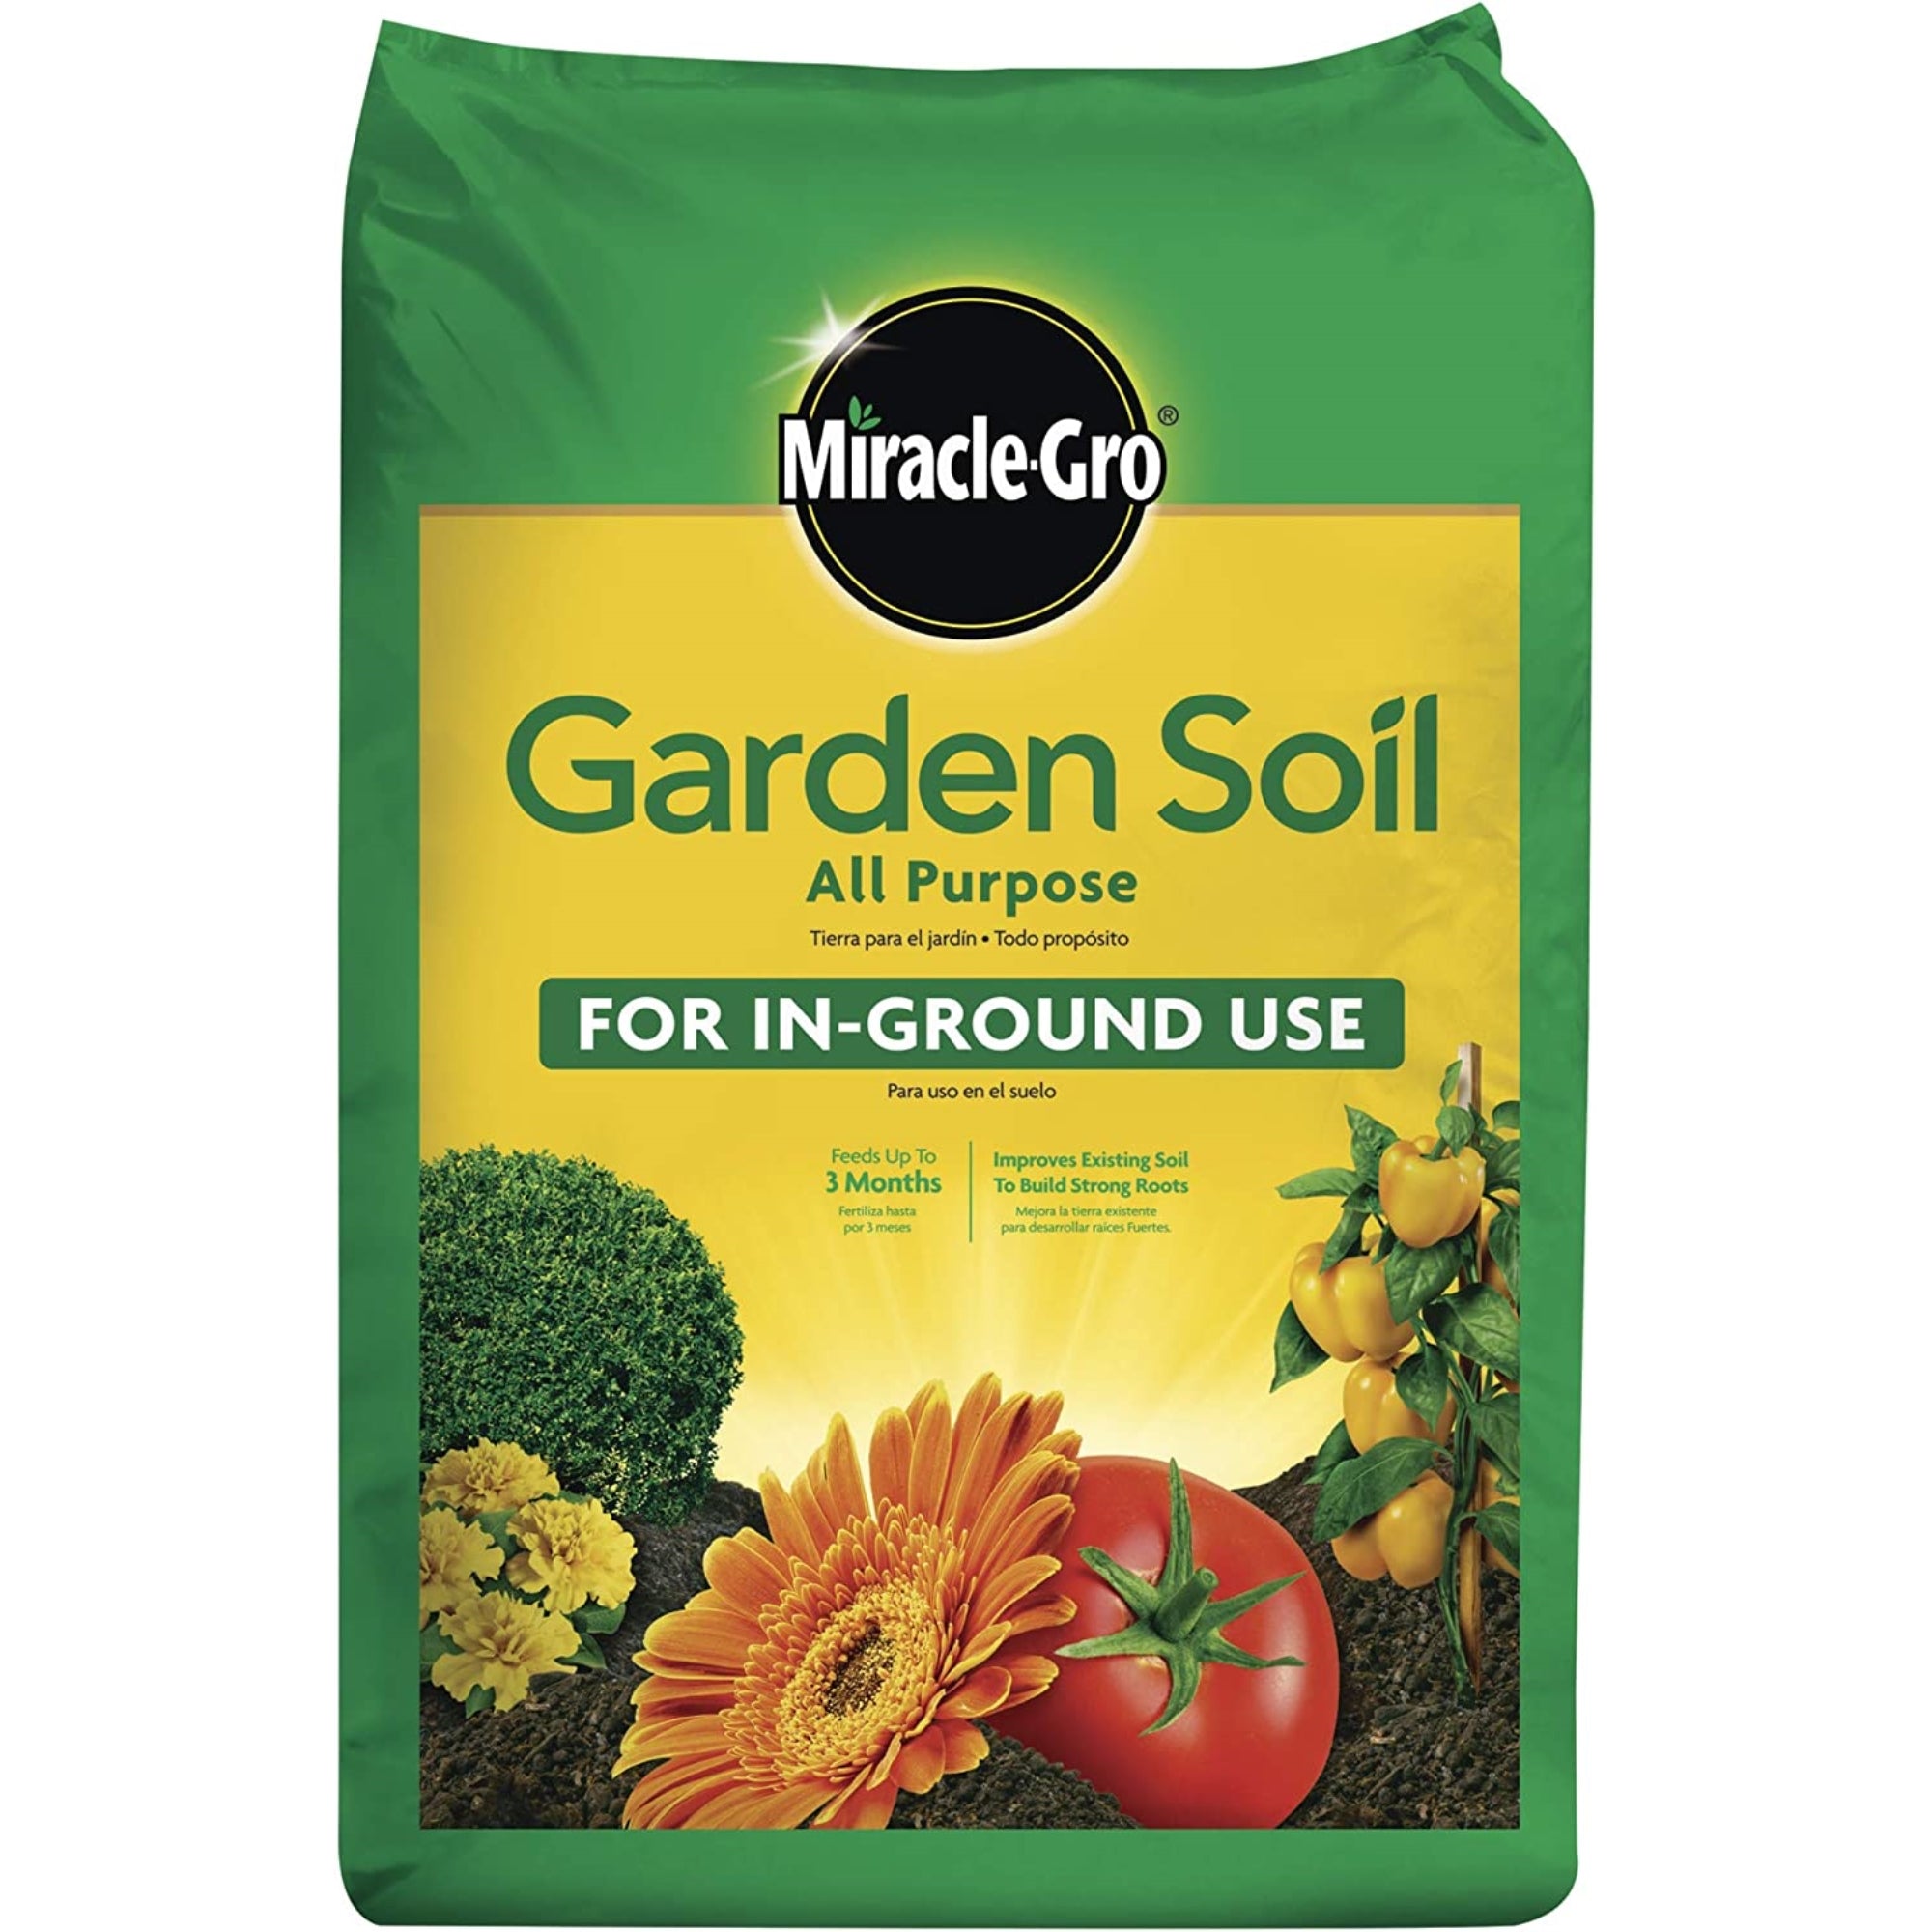 Miracle-Gro Garden Soil All Purpose for In-Ground Use - 2 cu. ft.